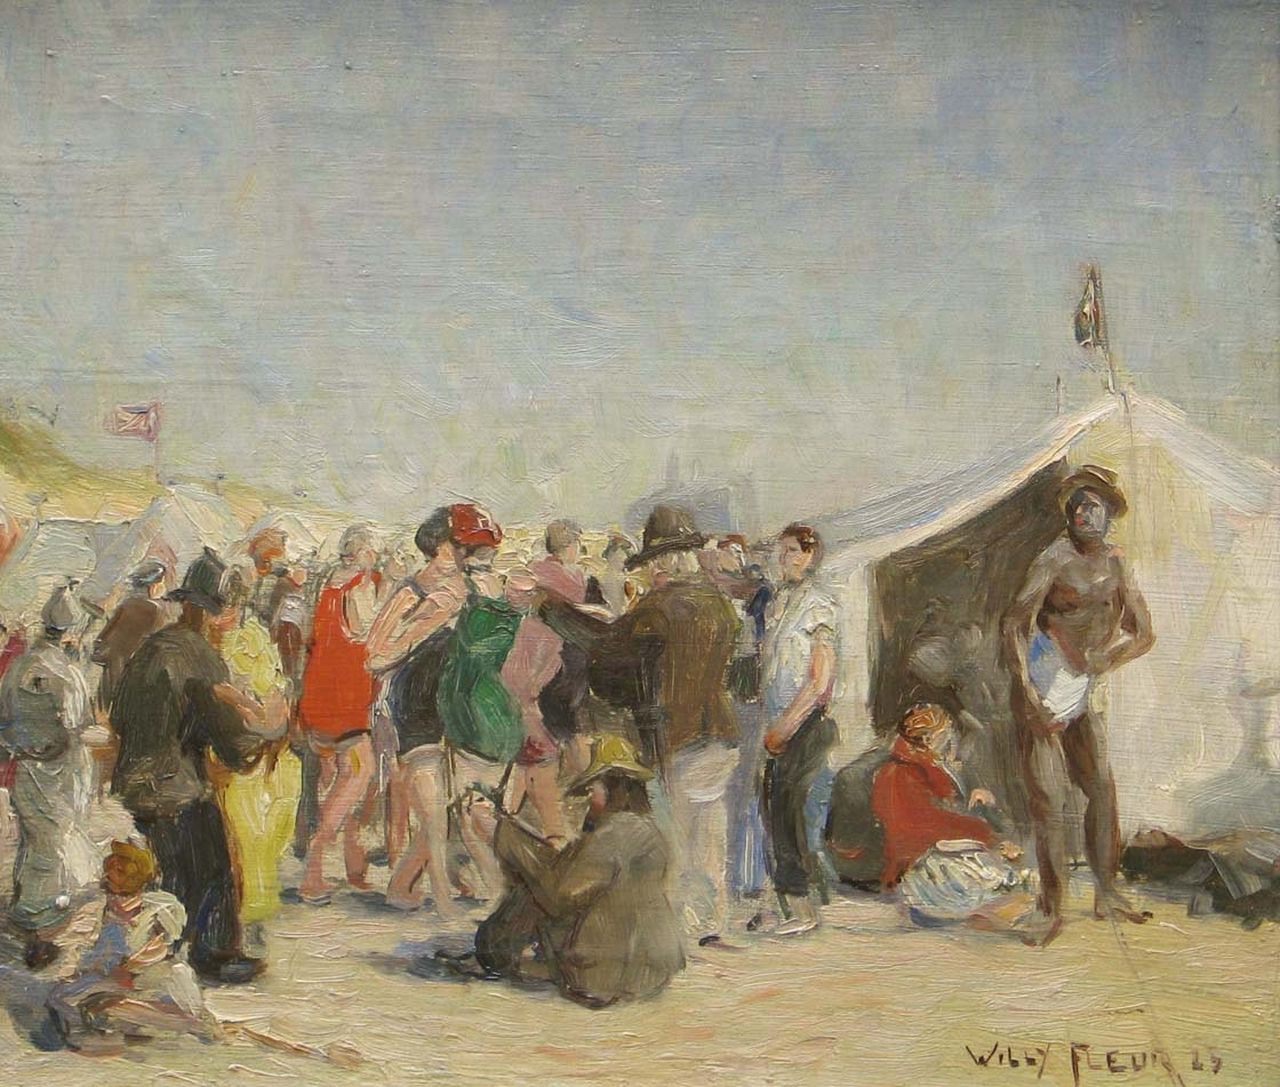 Fleur J.W.  | Johan Willem 'Willy' Fleur, A party at the beach, oil on canvas 30.1 x 35.2 cm, signed l.r. and dated '23